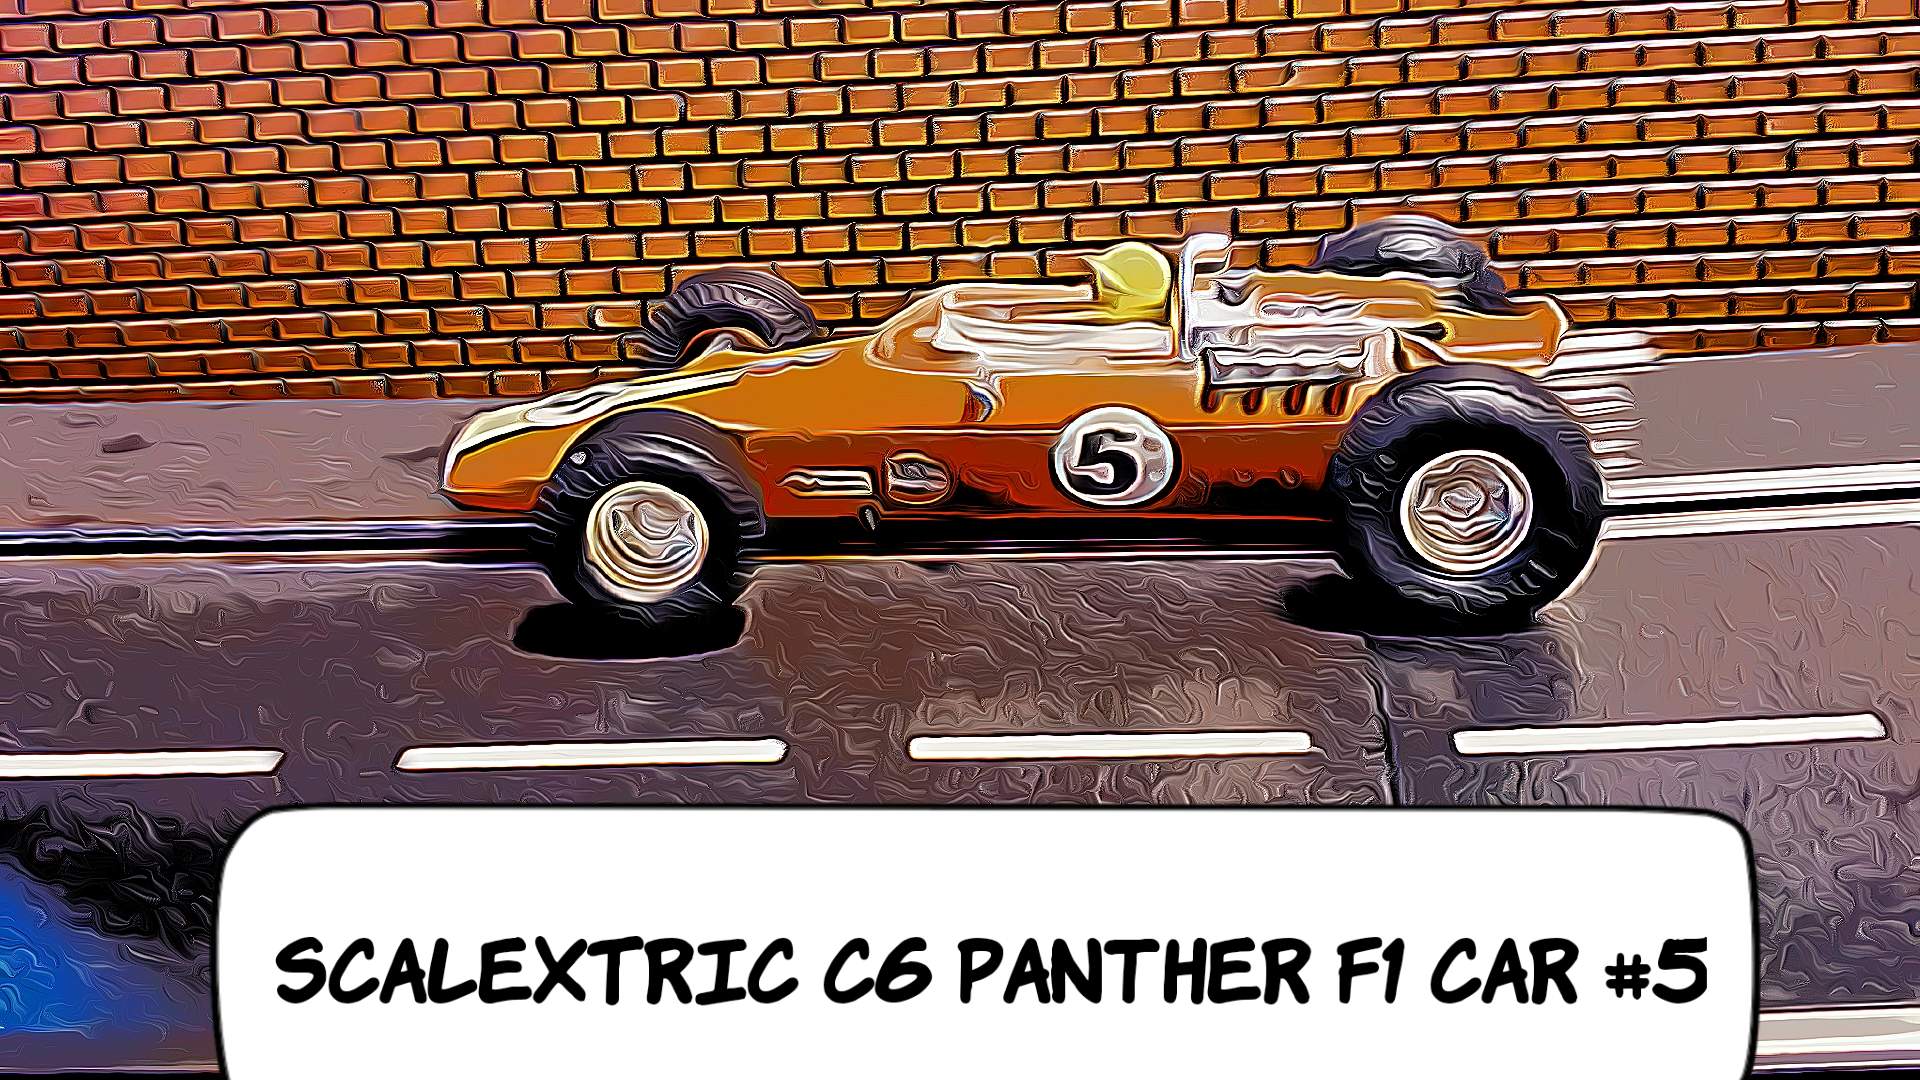 * Sale * Scalextric Panther C6 F1 Slot Car #5 1/32 Scale 